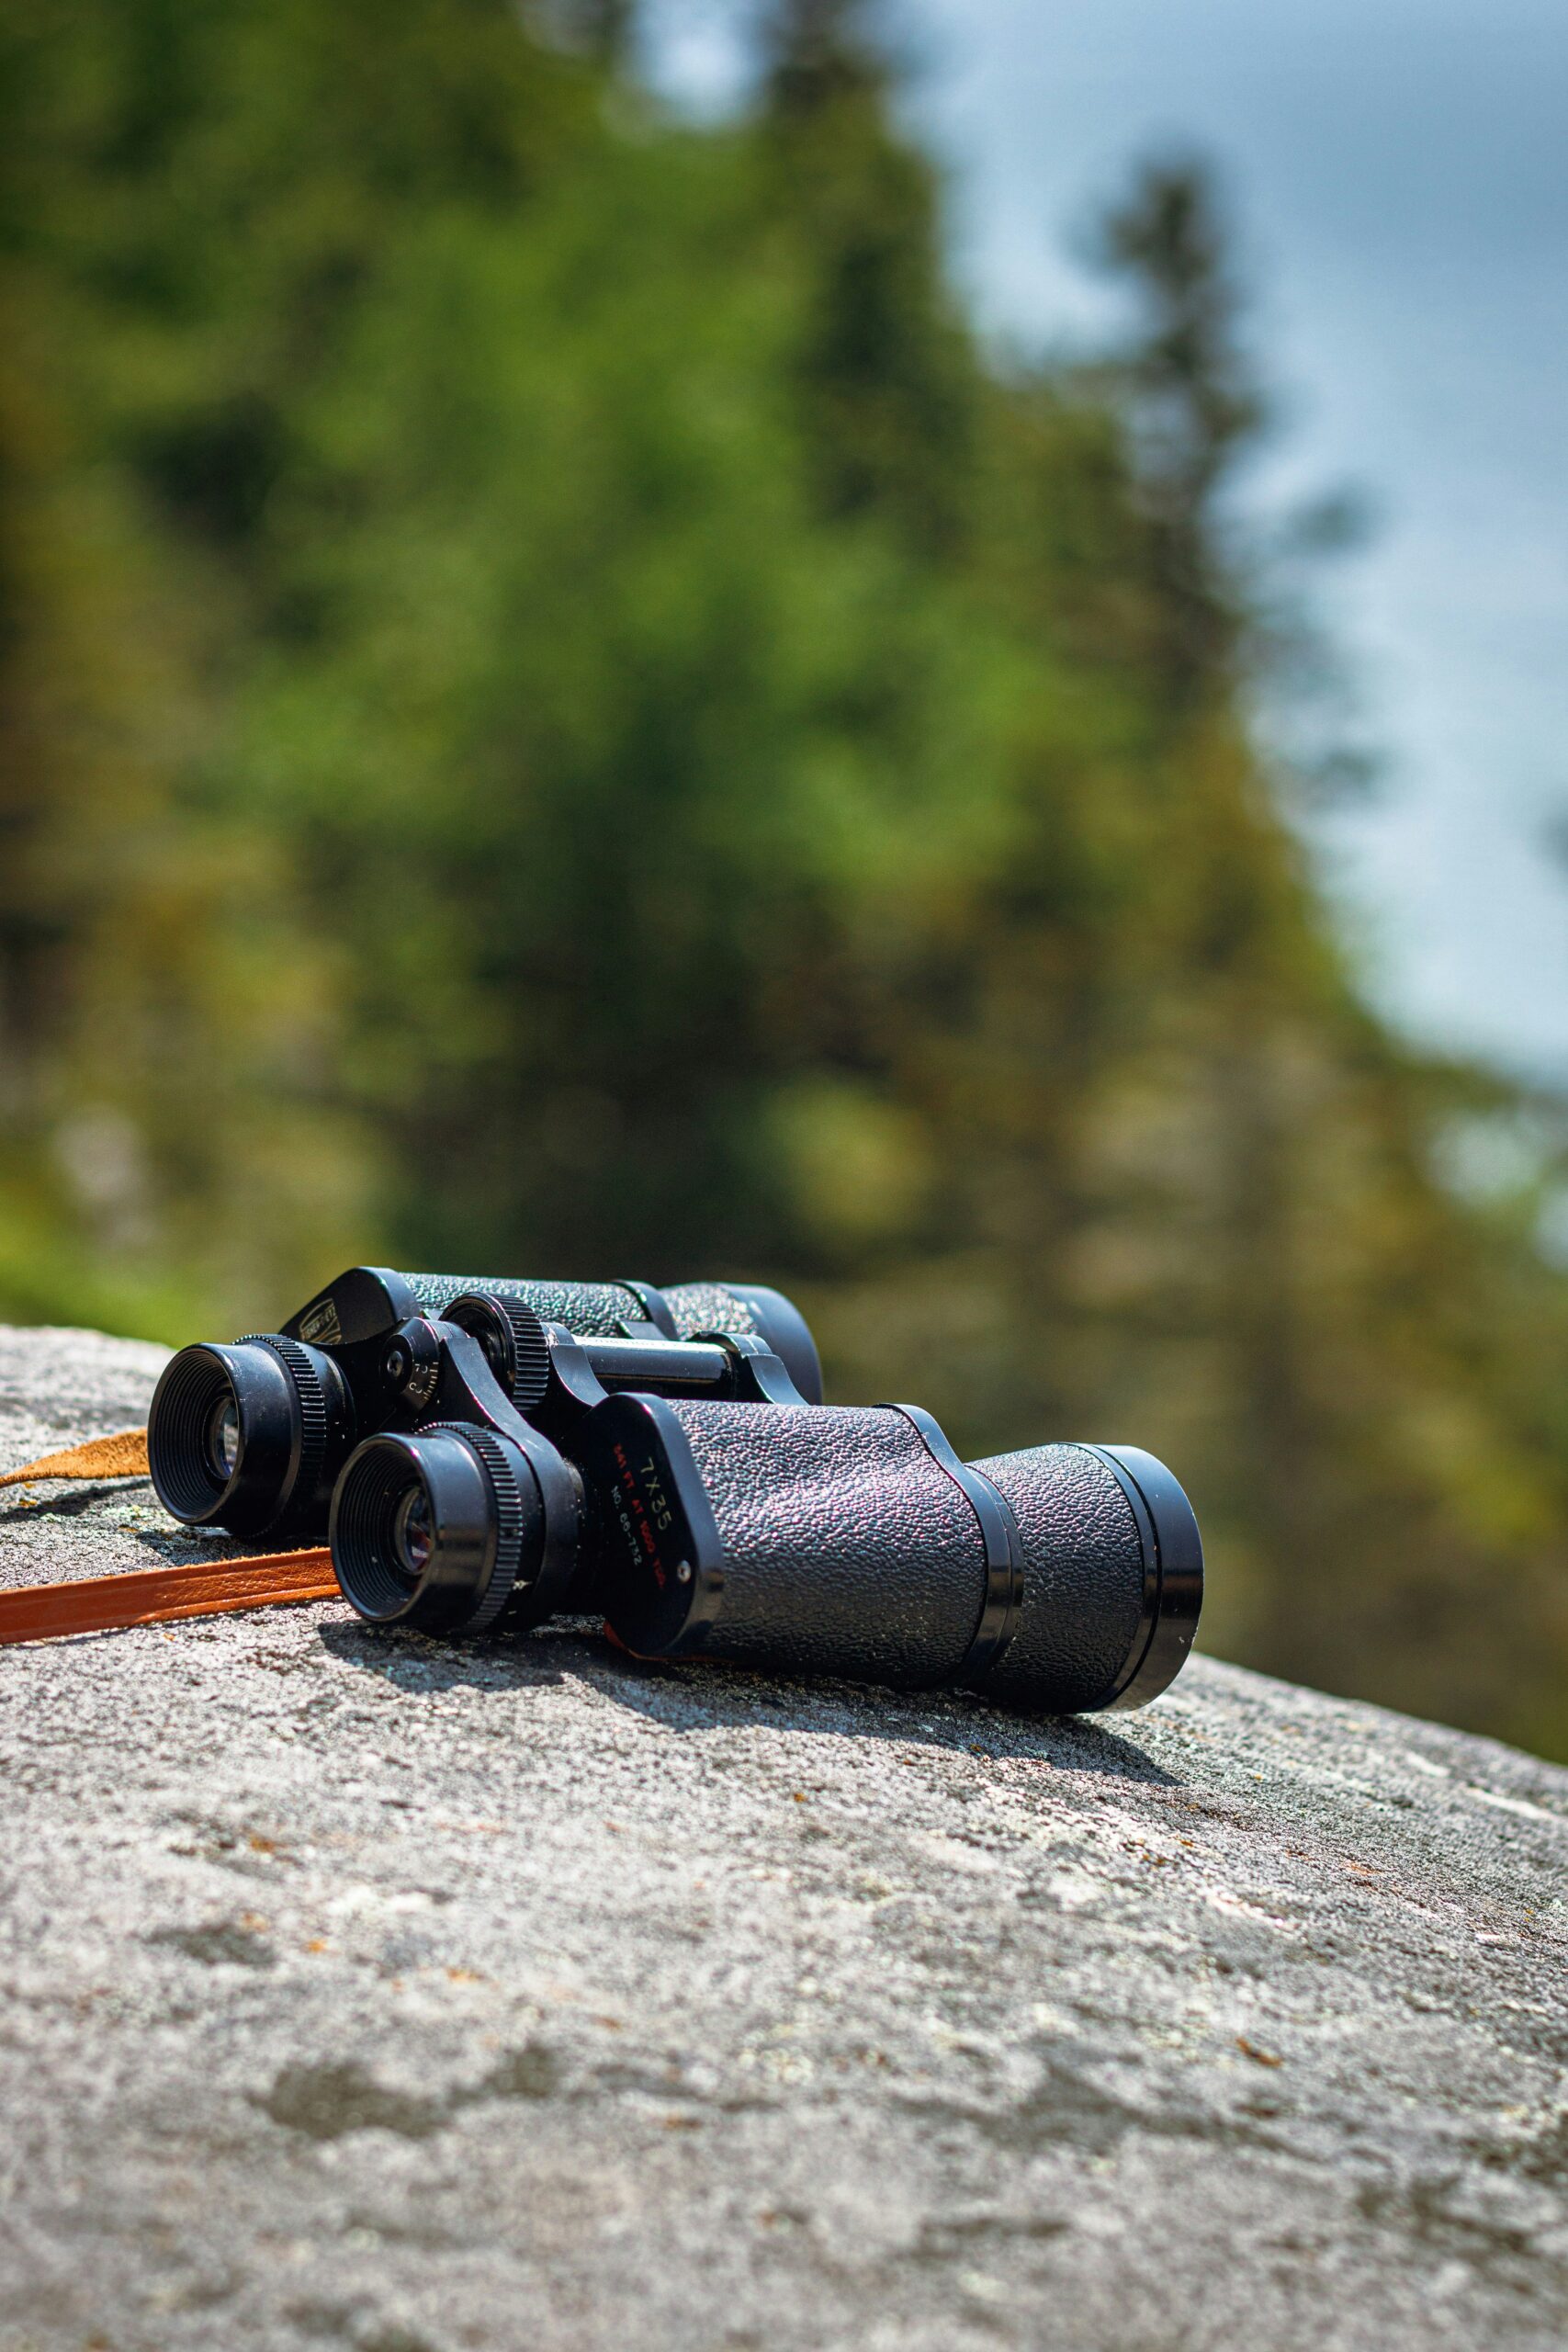 What Is The Best Binocular On The Market?